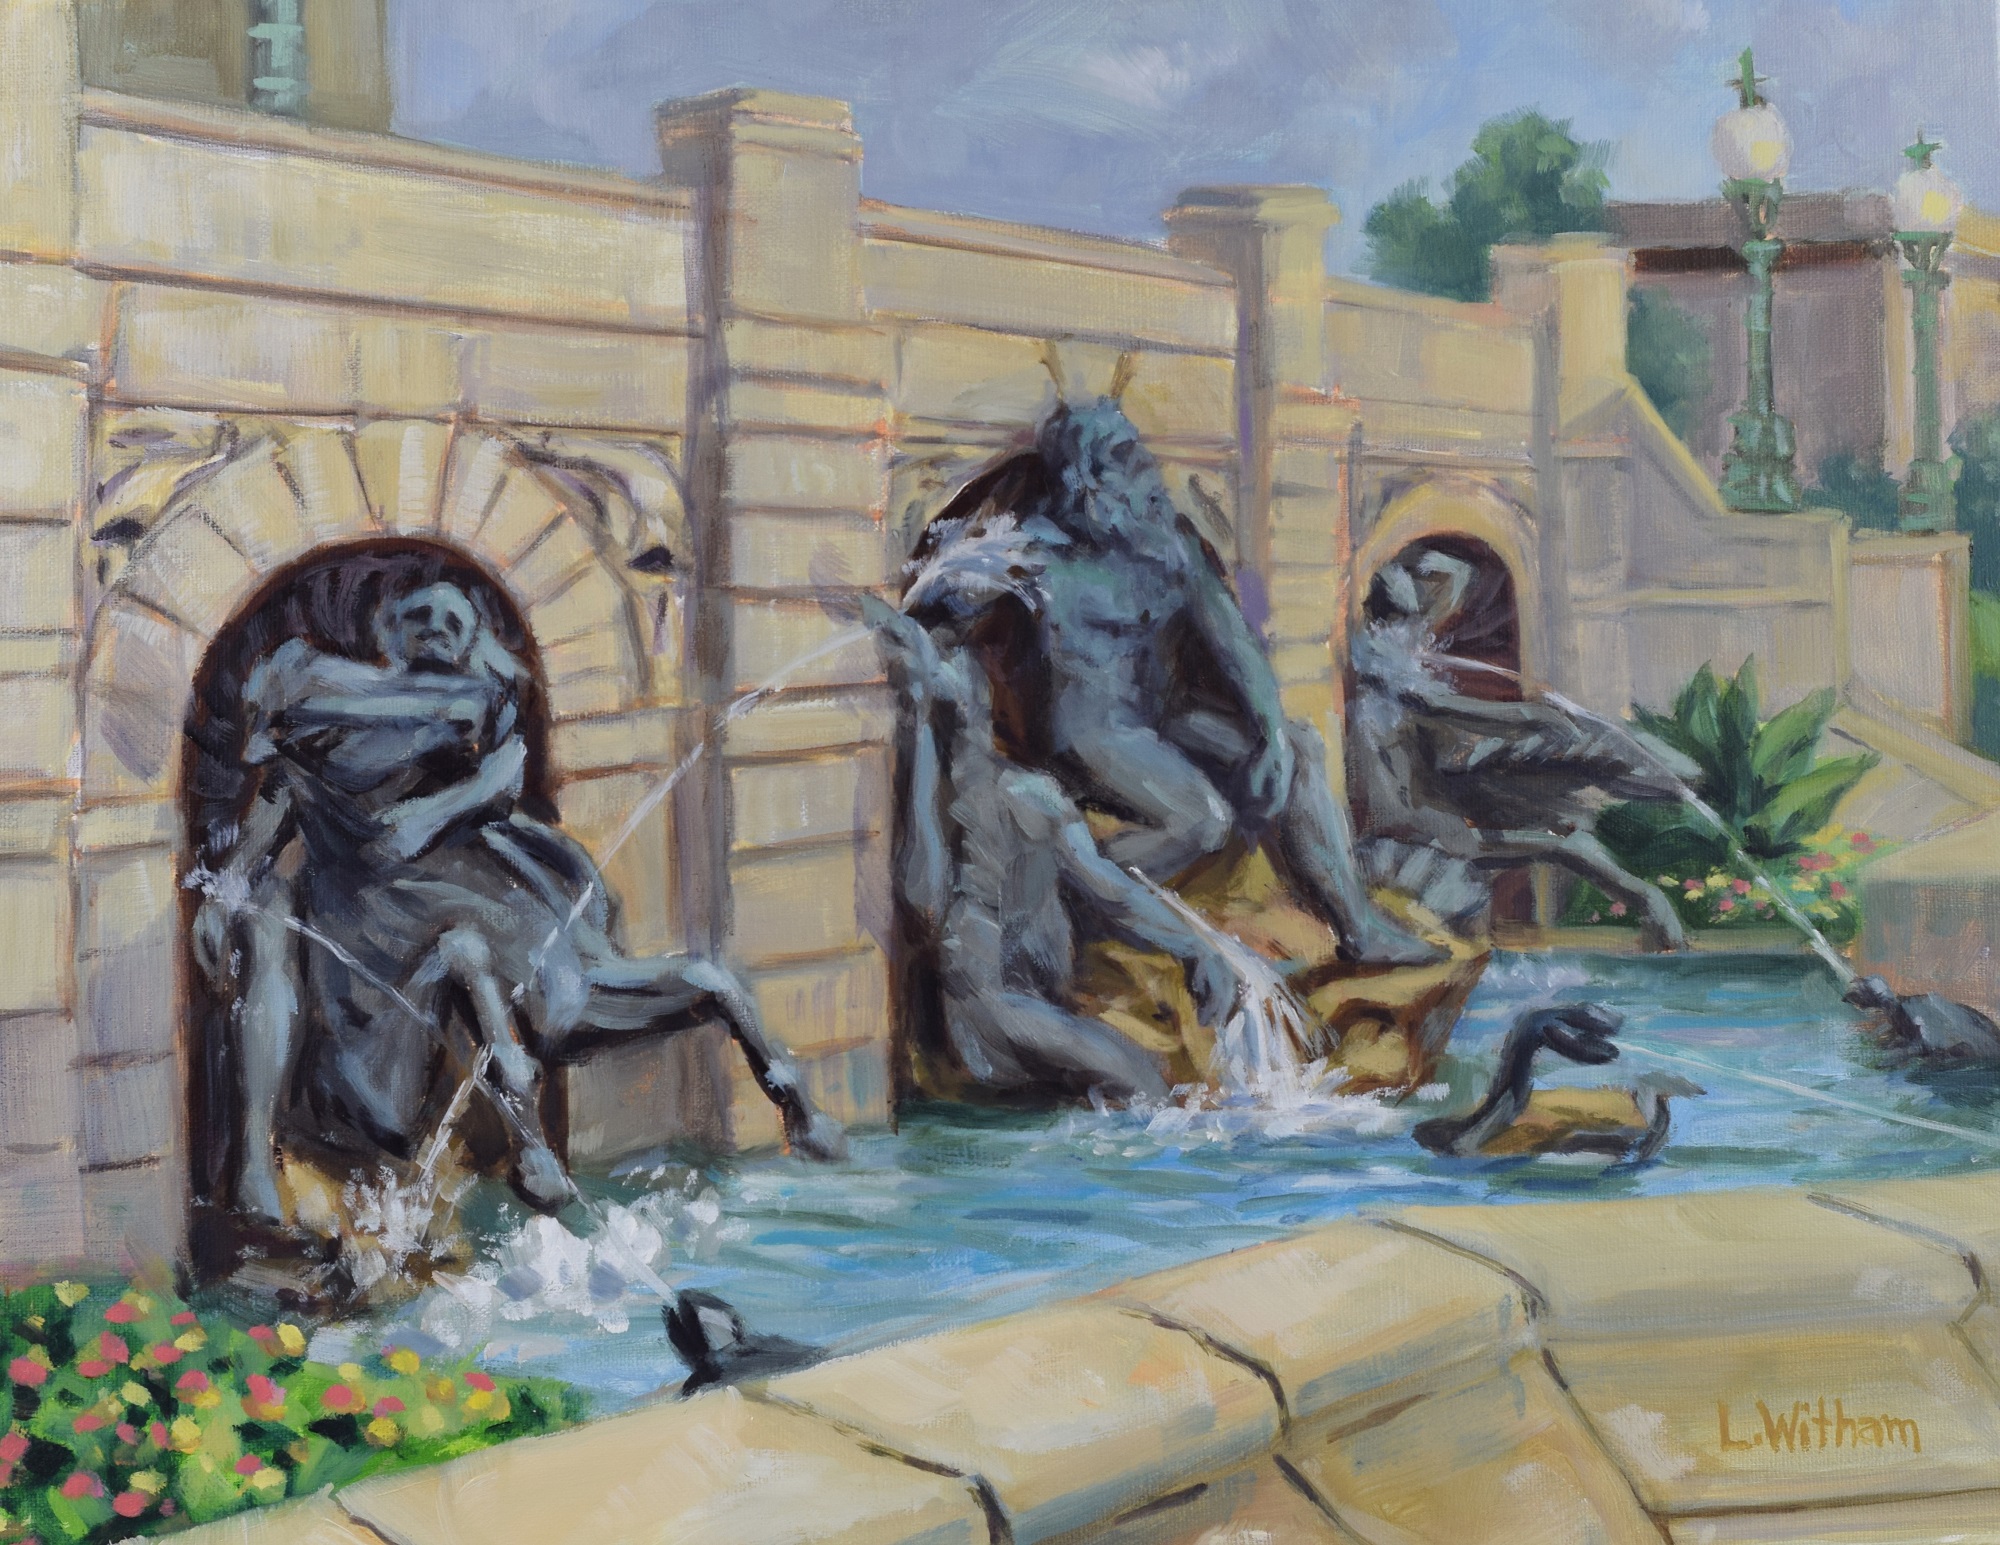 Neptune Fountain, Library of Congress, Oil on linen, 11x14